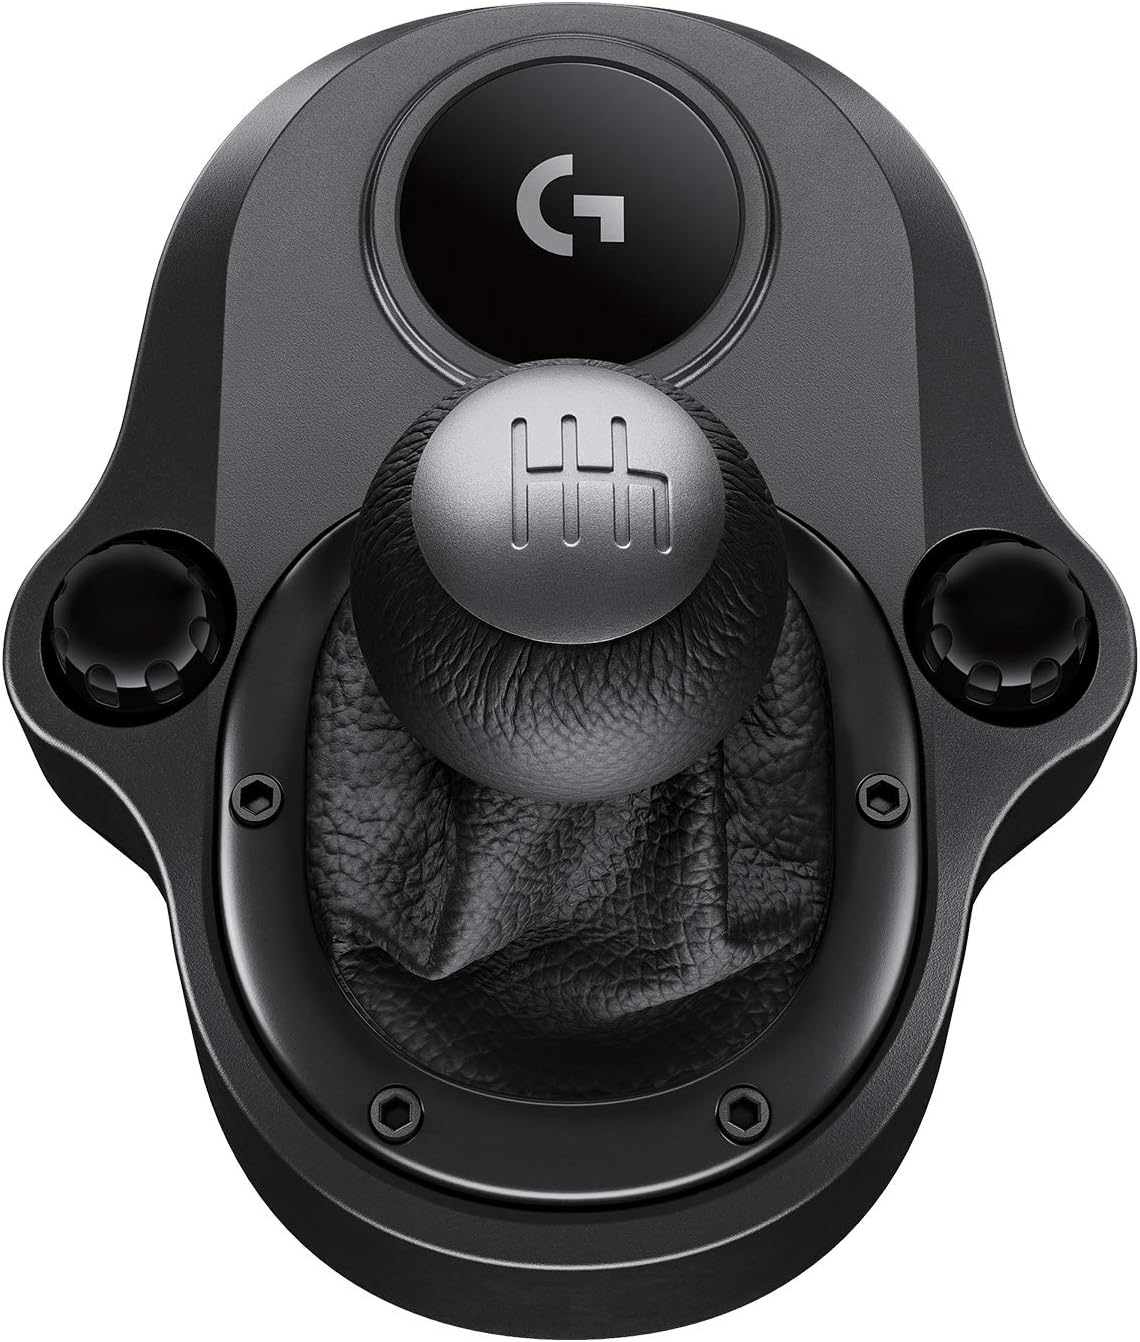 Logitech Driving Force Shifter for G29 &amp; G920 Racing Wheels - Black/Silver (Certified Refurbished)